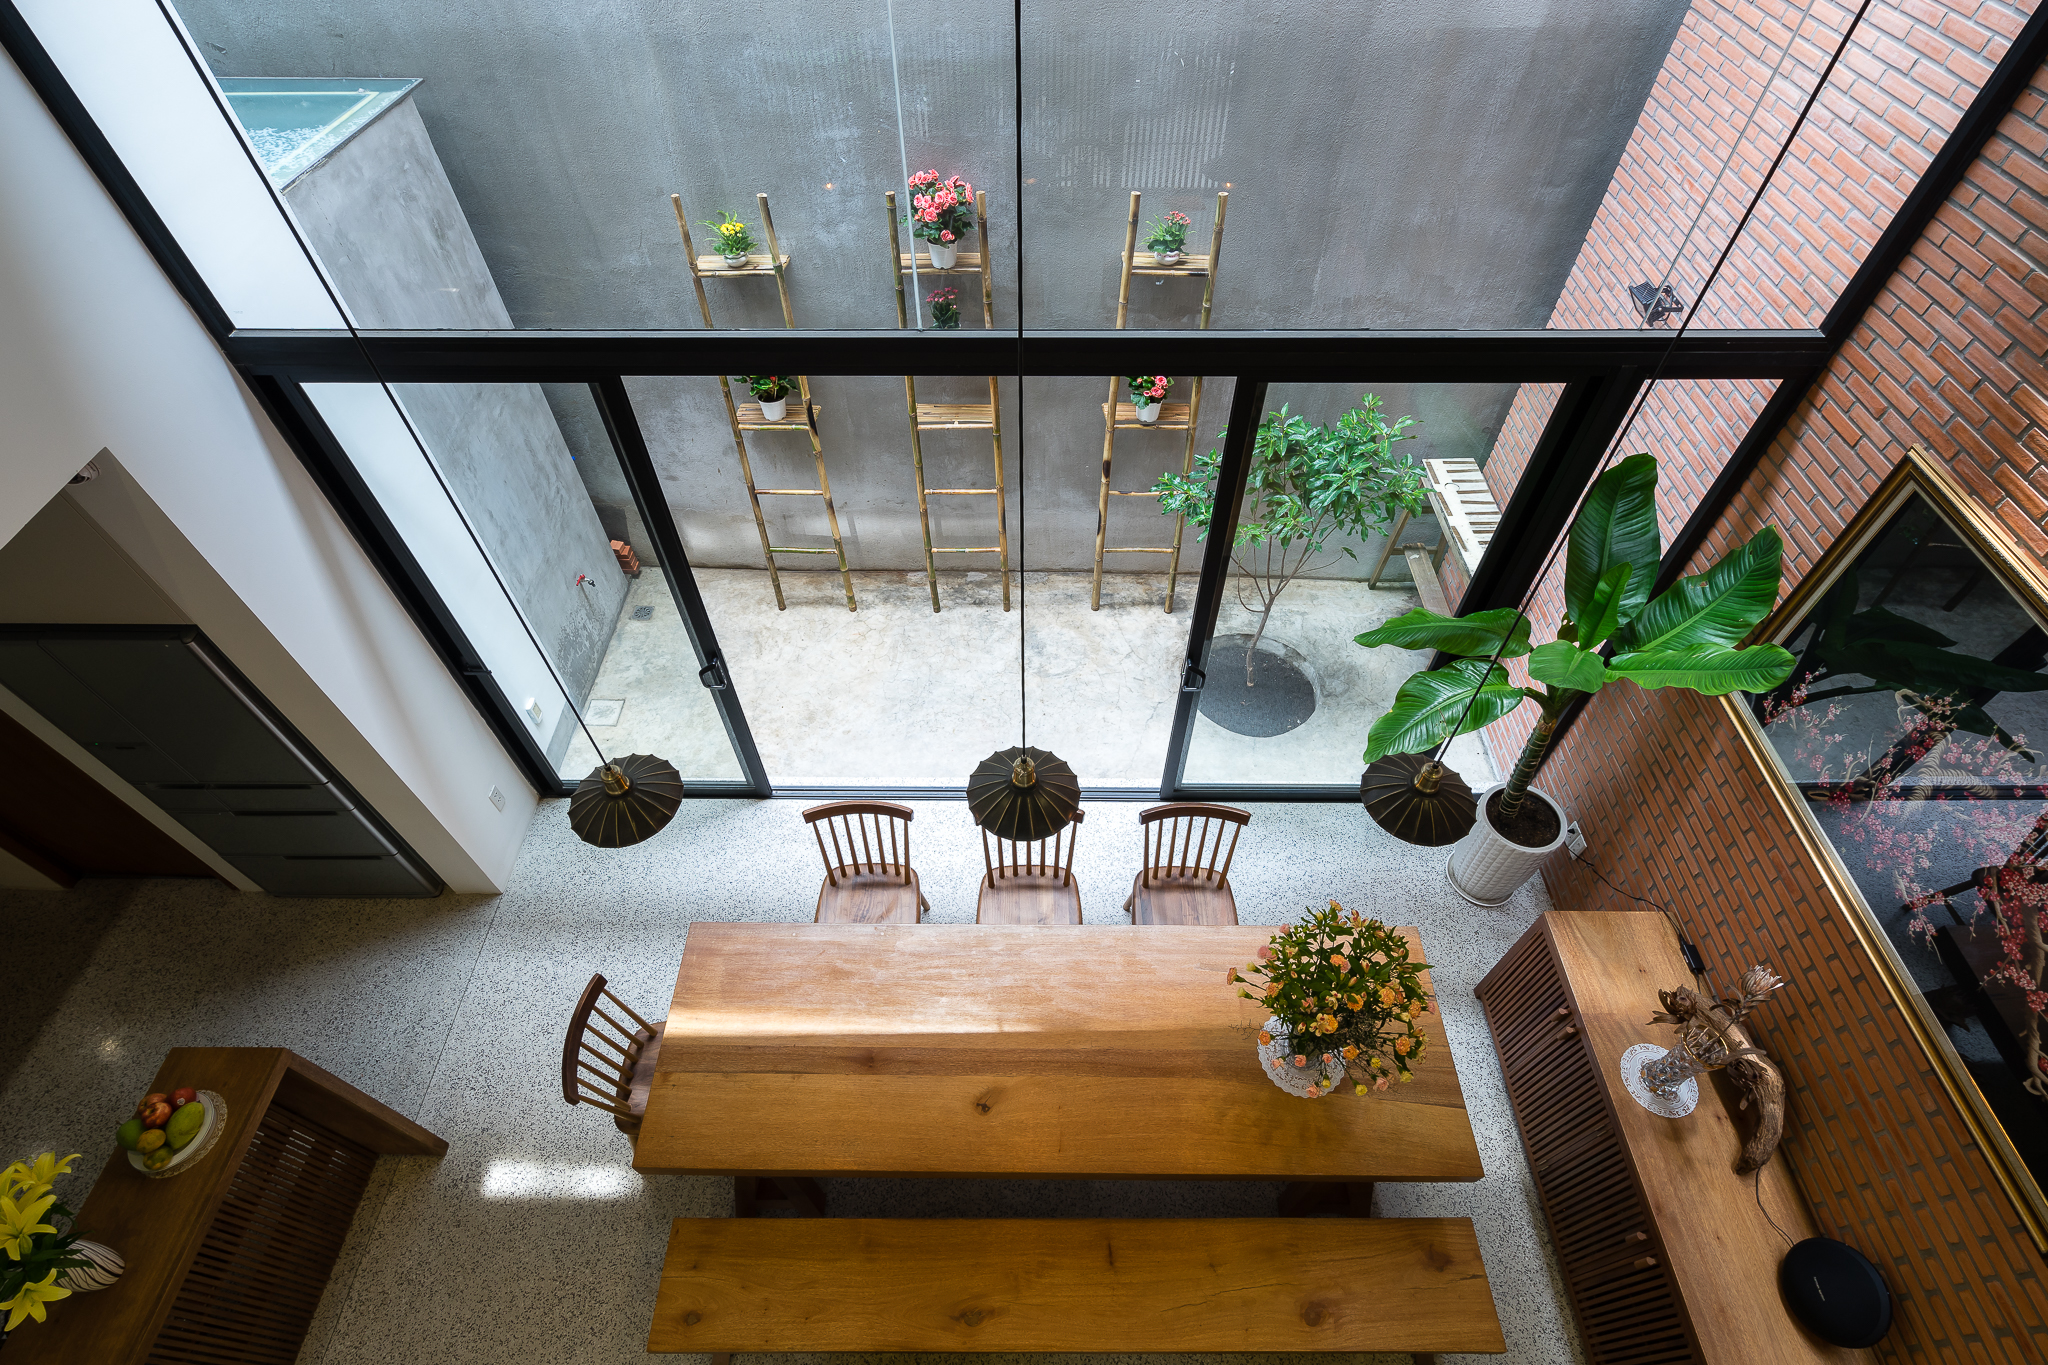 NDC HOUSE by TROPICAL SPACE, Ho Chi Minh City, Vietnam